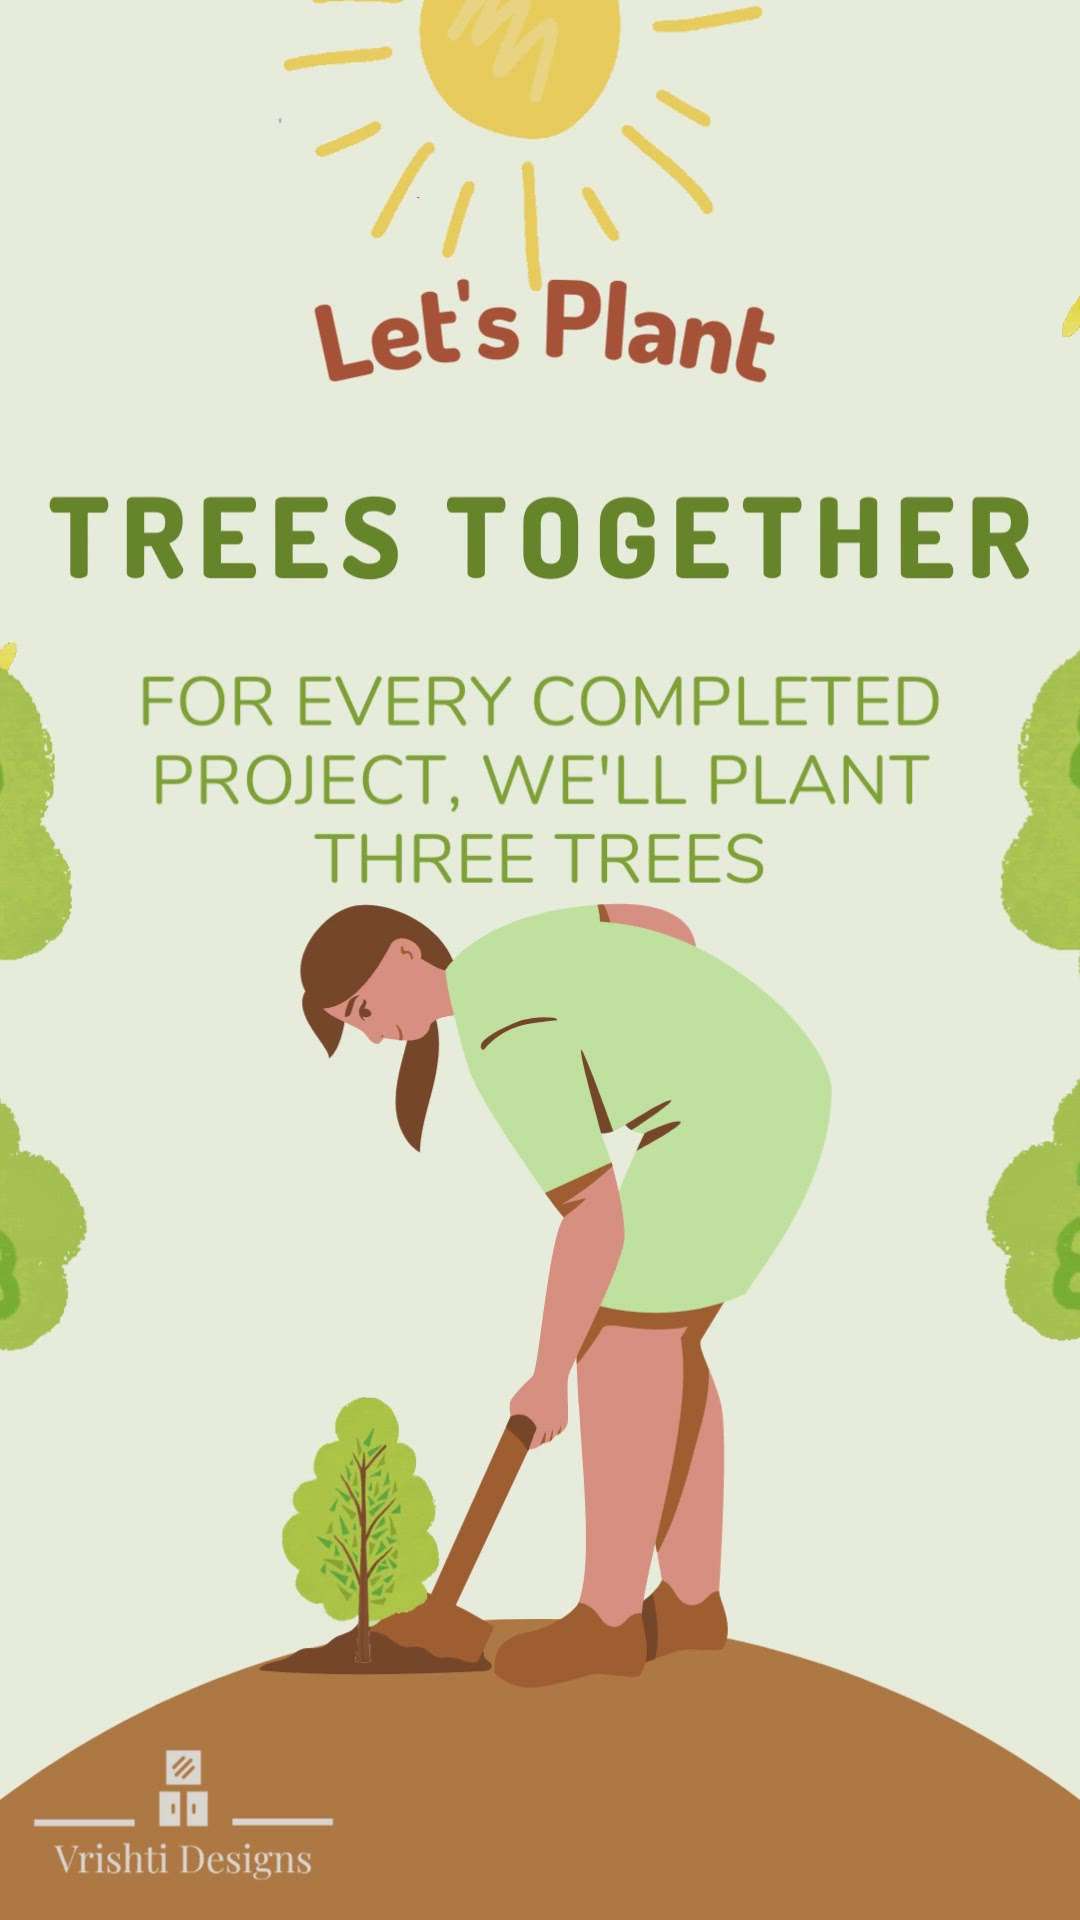 "At Vrishti Designs, we're passionate about creating beautiful spaces that enhance people's lives. But we also believe that design should be sustainable and responsible. That's why we're excited to launch our new tree-planting campaign – for every project we complete, we'll plant 3 trees. With your support, we can create a more sustainable future for generations to come. 🌱🌿🌳 #sustainability #environment #greenerfuture #treeplanting #interiordesign  #vrishtidesigns